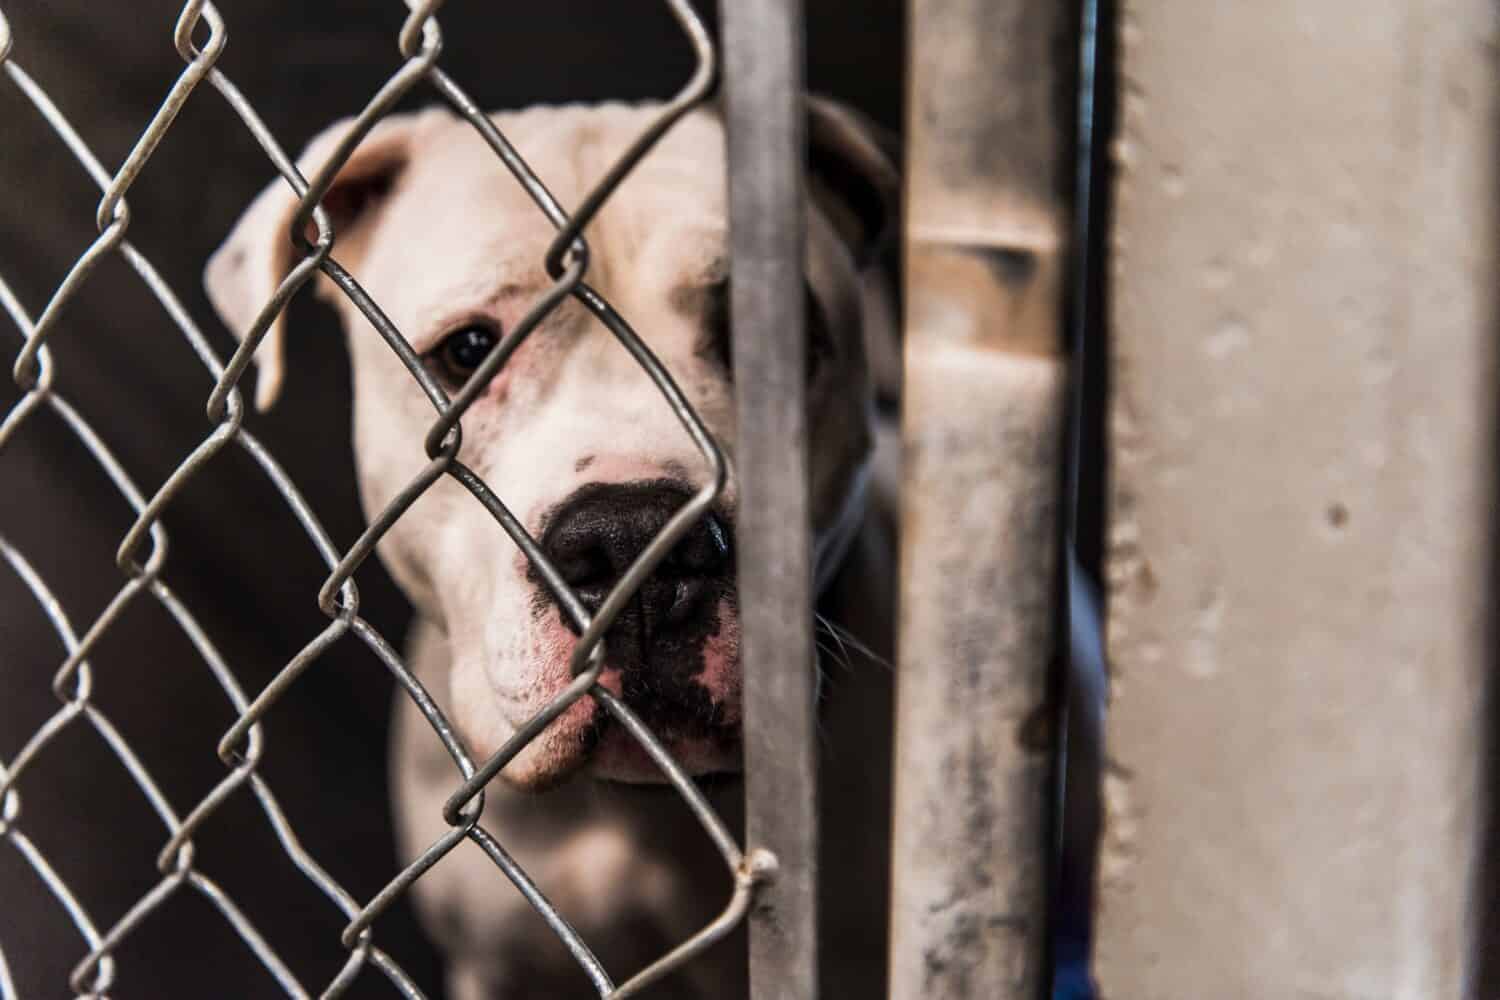 White American Bull Dog Pit Bull Mixed Breed Dog Large Adult Dog Looking Sad Eye Contact with Camera through Animal Shelter Kennel Cage